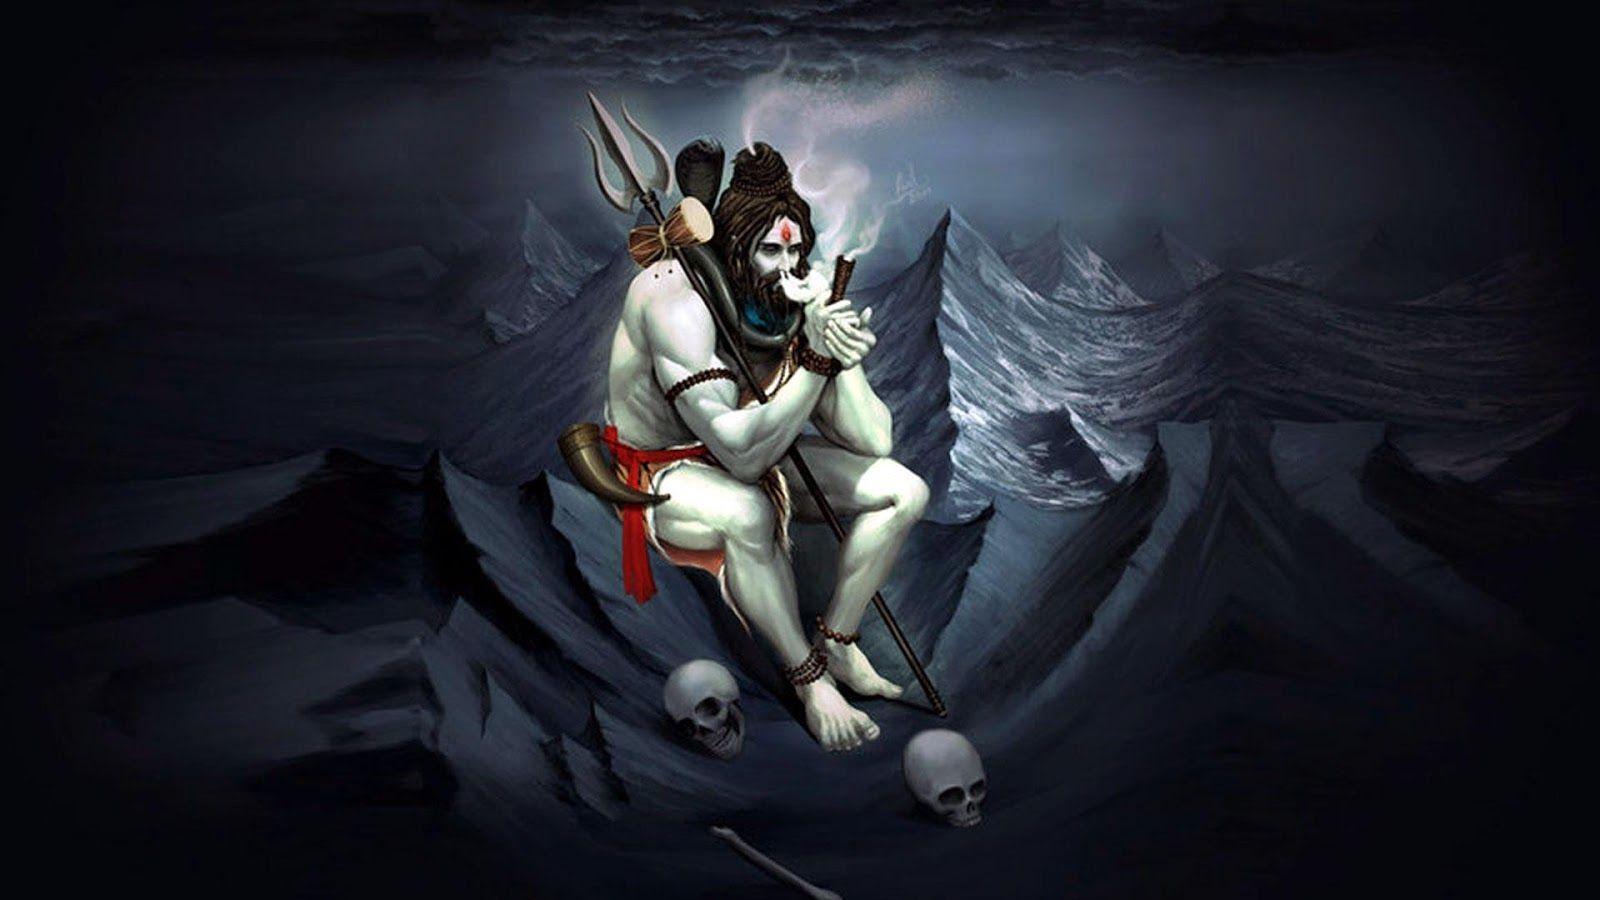 Lord Shiva image, wallpapers, photos & pics, download Lord Shiva hd wallpapers